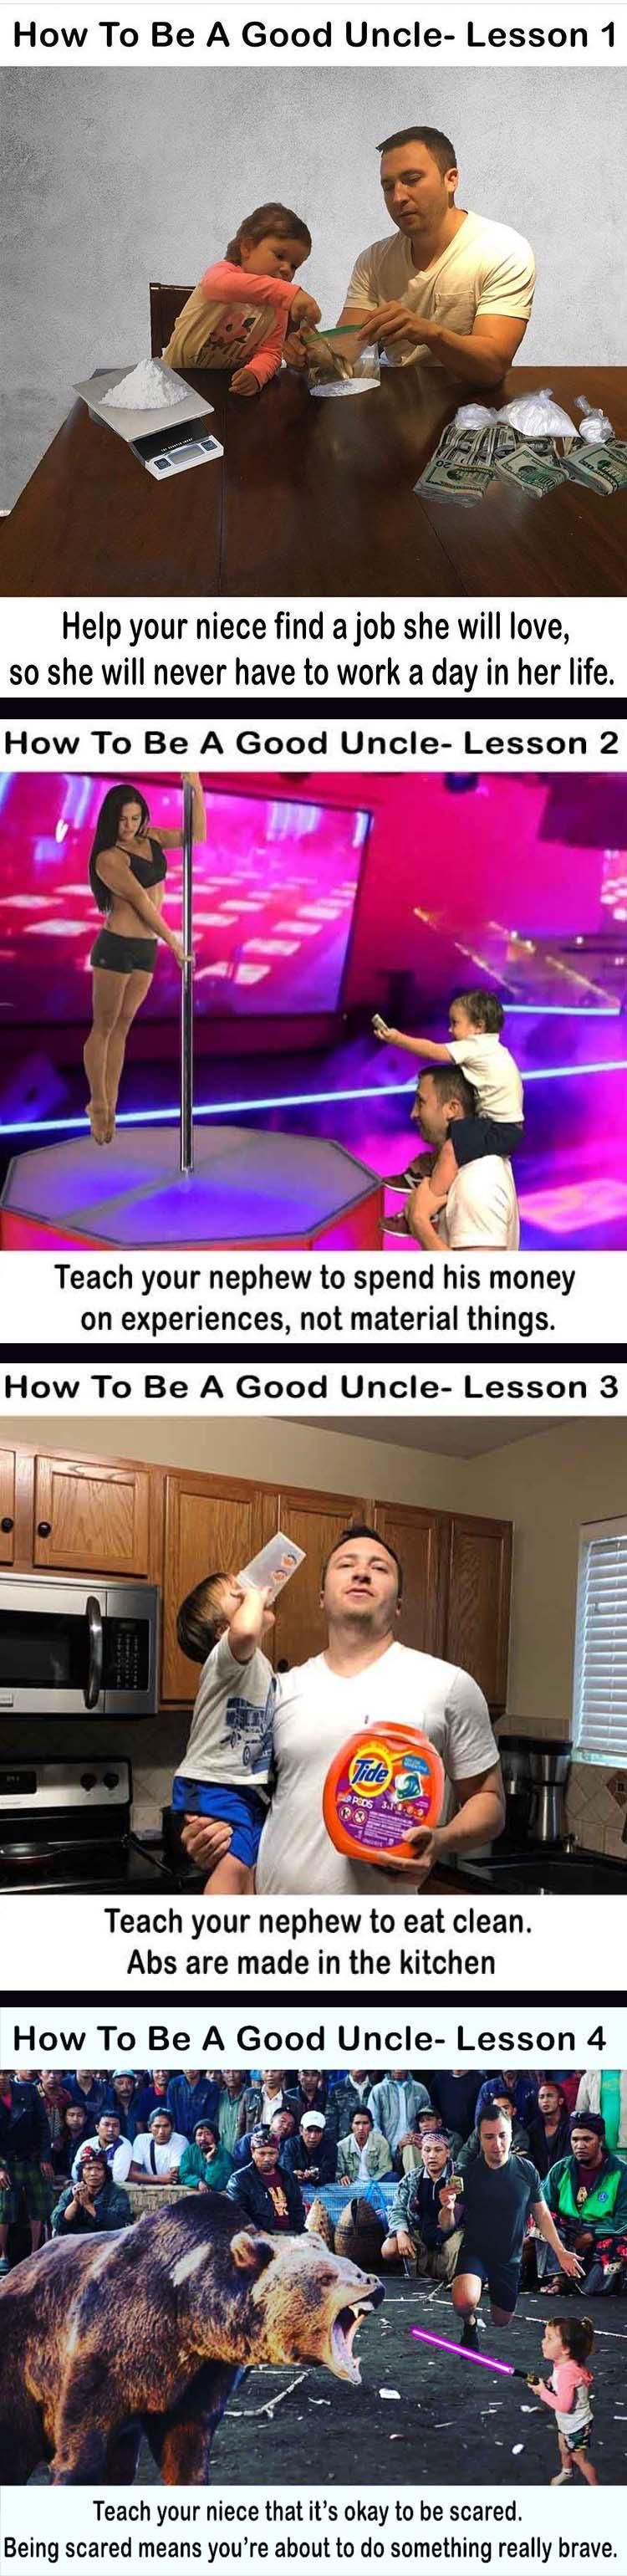 I tried to teach my niece and nephew a few life lessons...It may have cost me my babysitting privileges.